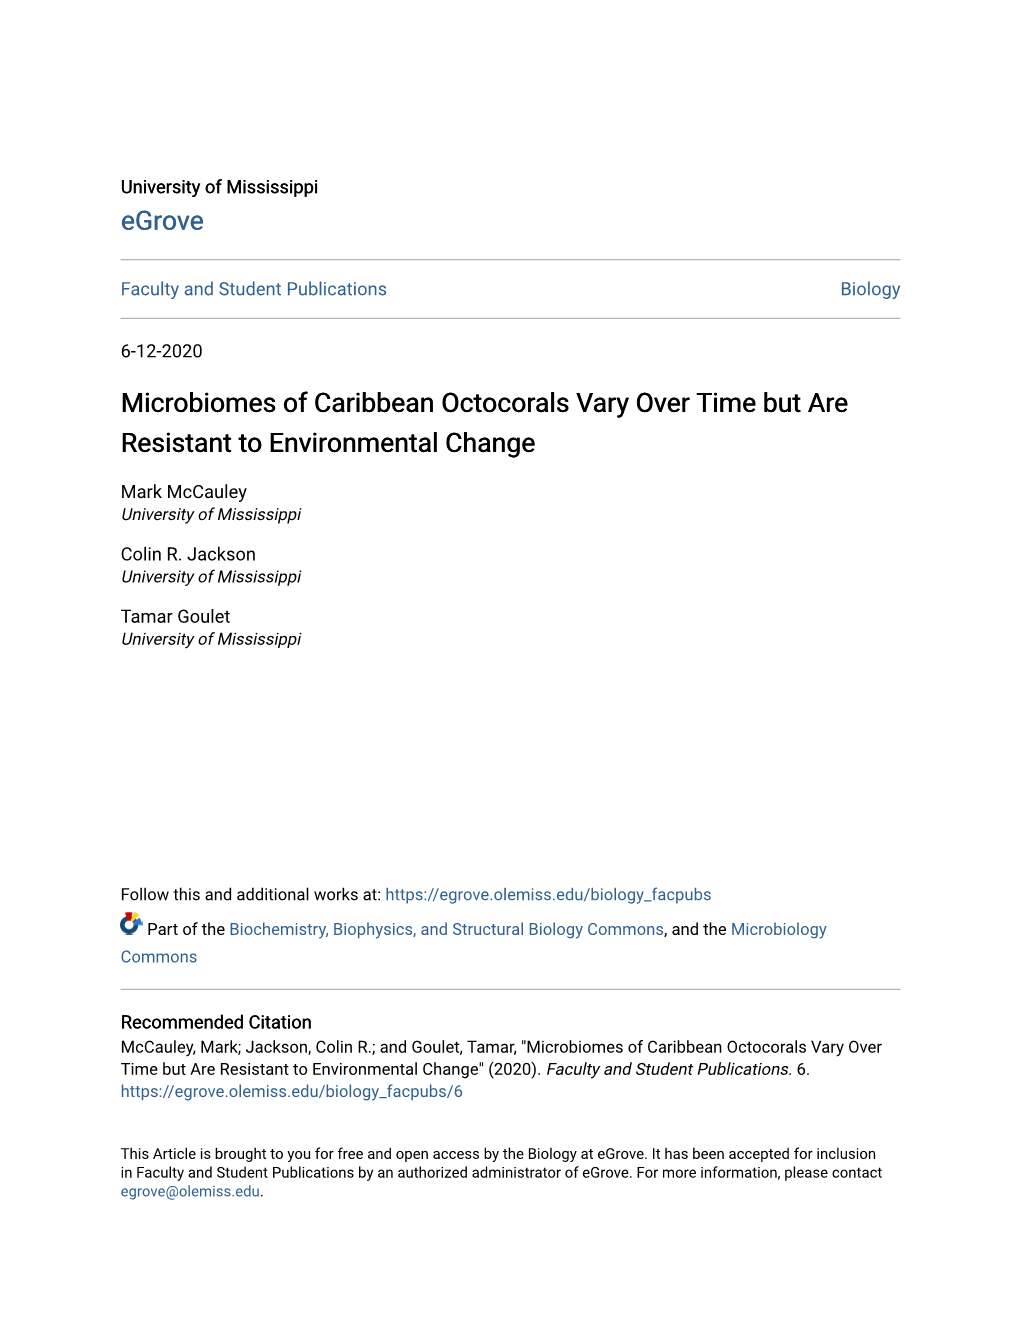 Microbiomes of Caribbean Octocorals Vary Over Time but Are Resistant to Environmental Change